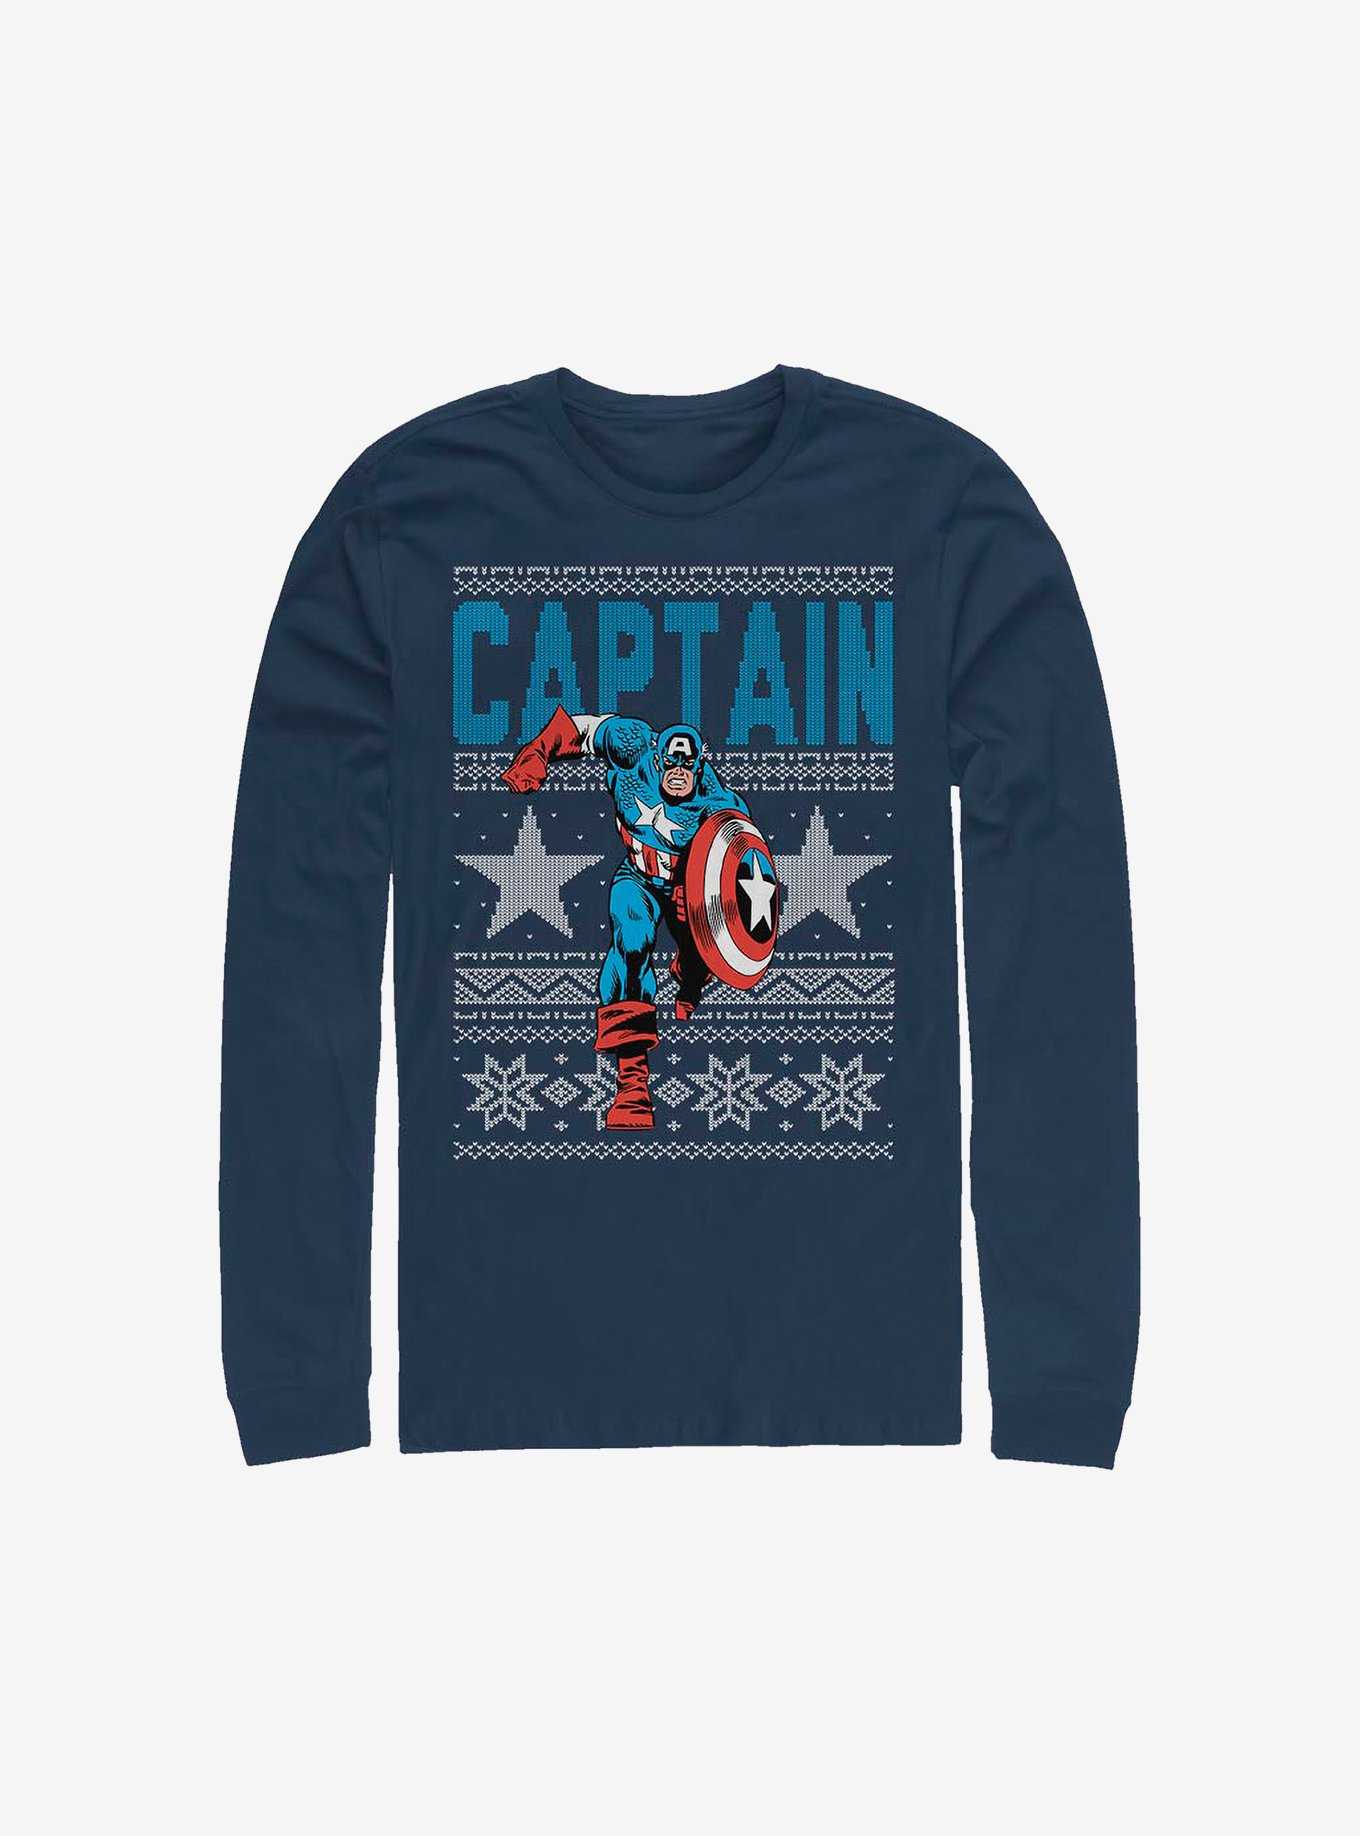 Marvel Captain America Ugly Christmas Sweater Long-Sleeve T-Shirt, , hi-res